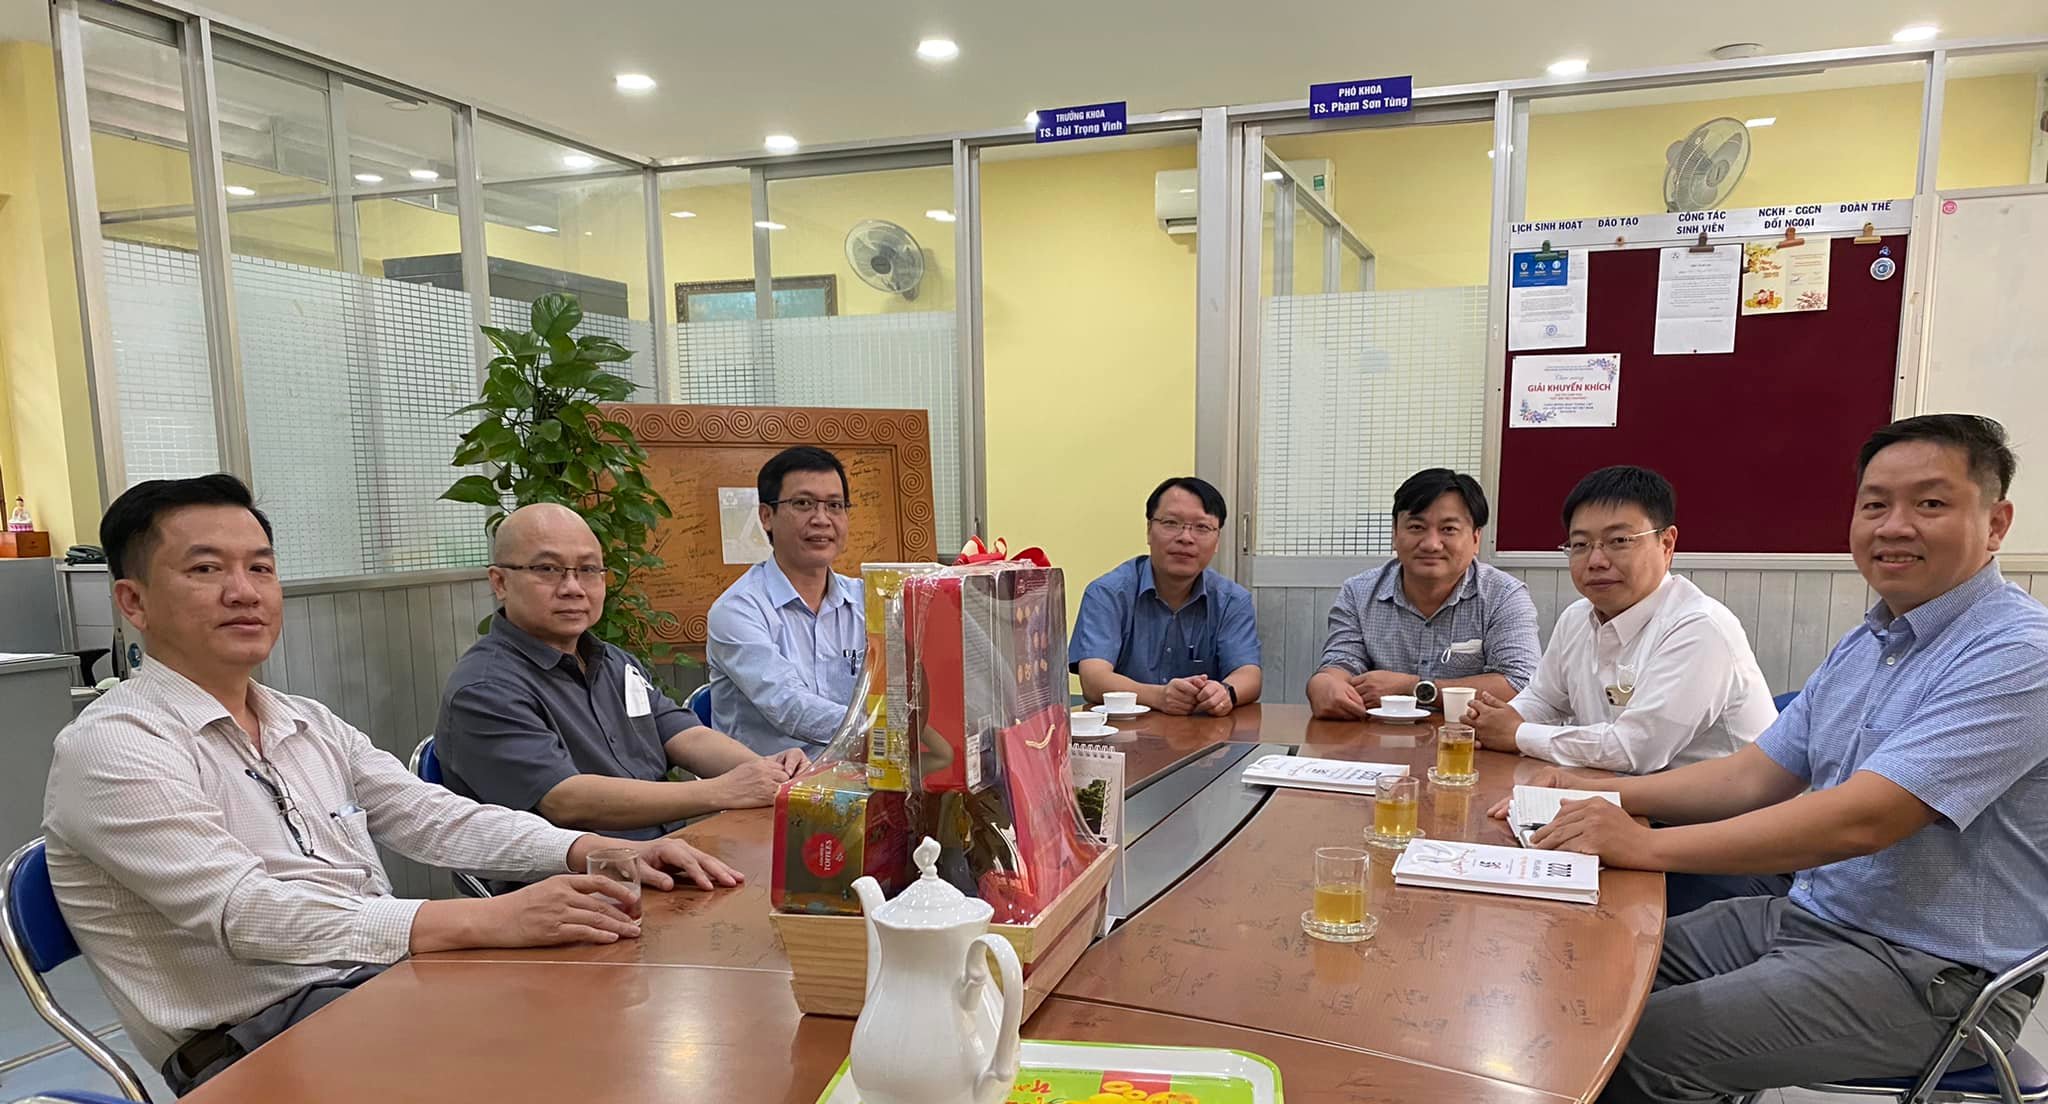 Welcoming business directors Okasanlivic (Japan), AT$T Company, Cwer Center, Thanh Khoi Consulting Company.